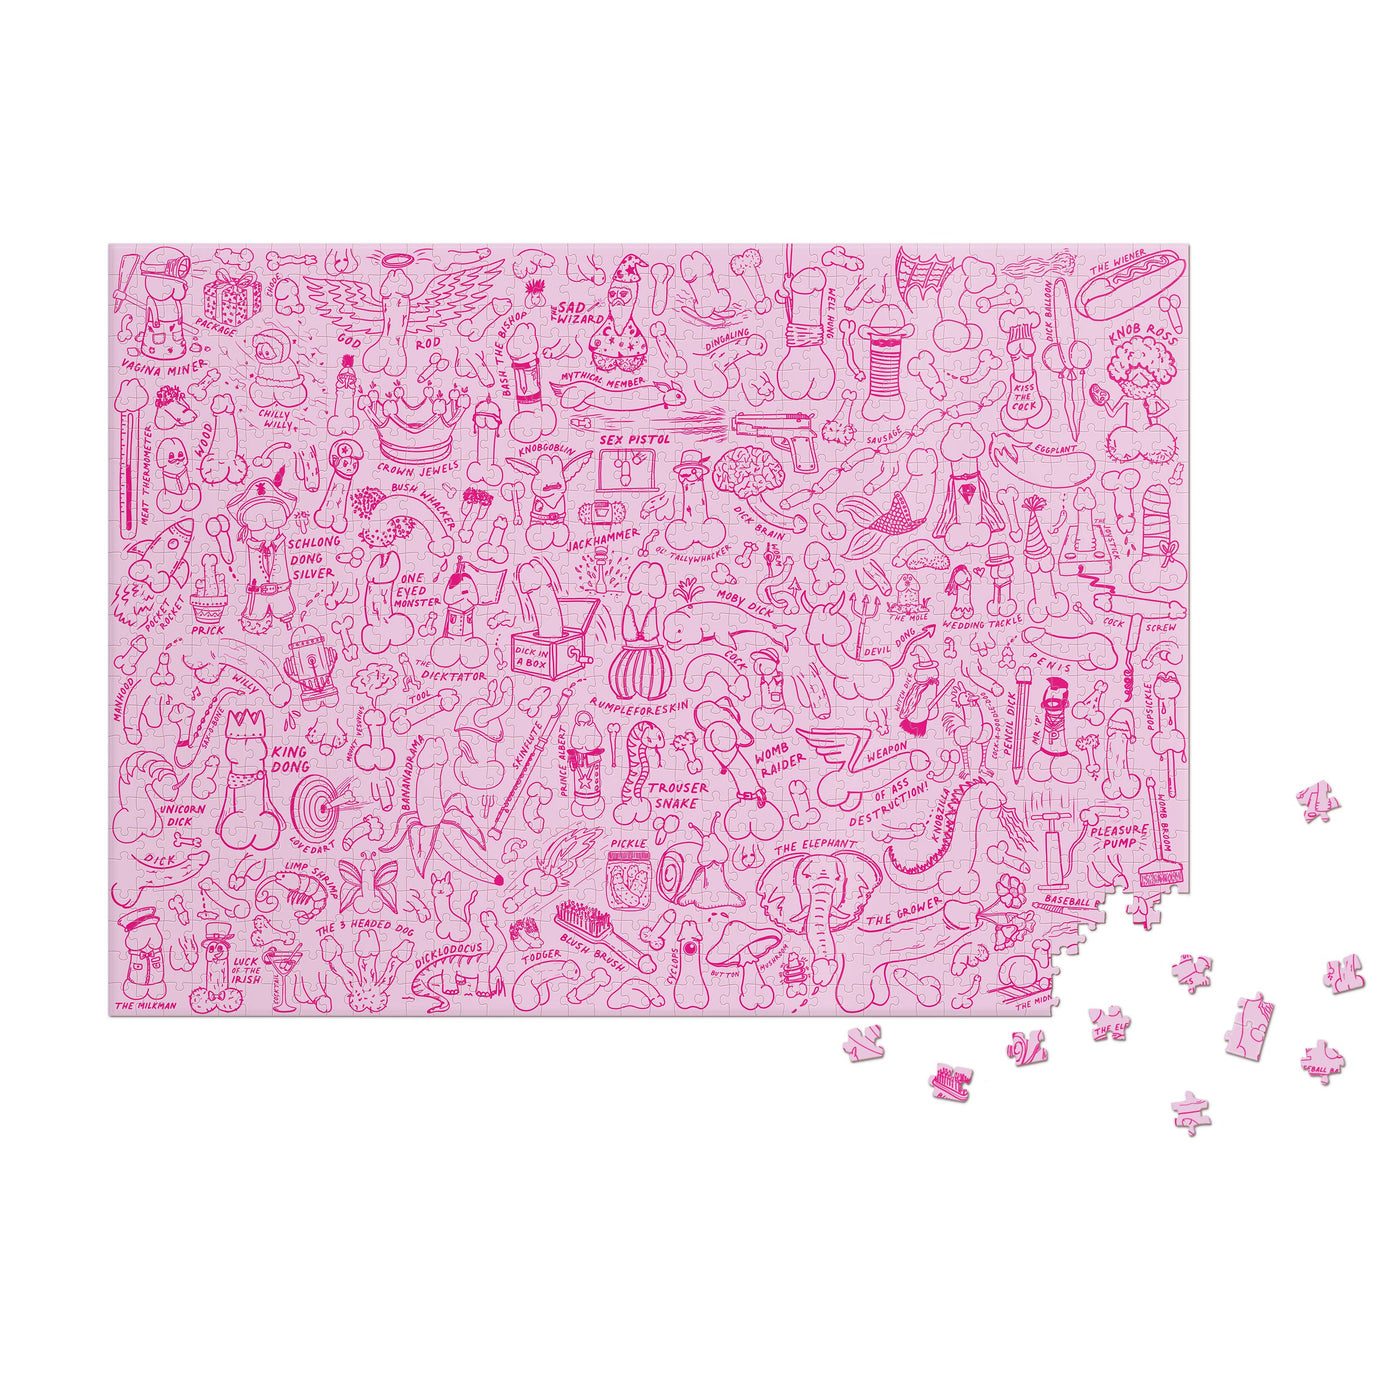 Penis Puzzle | 1,000 Piece Jigsaw Puzzle of